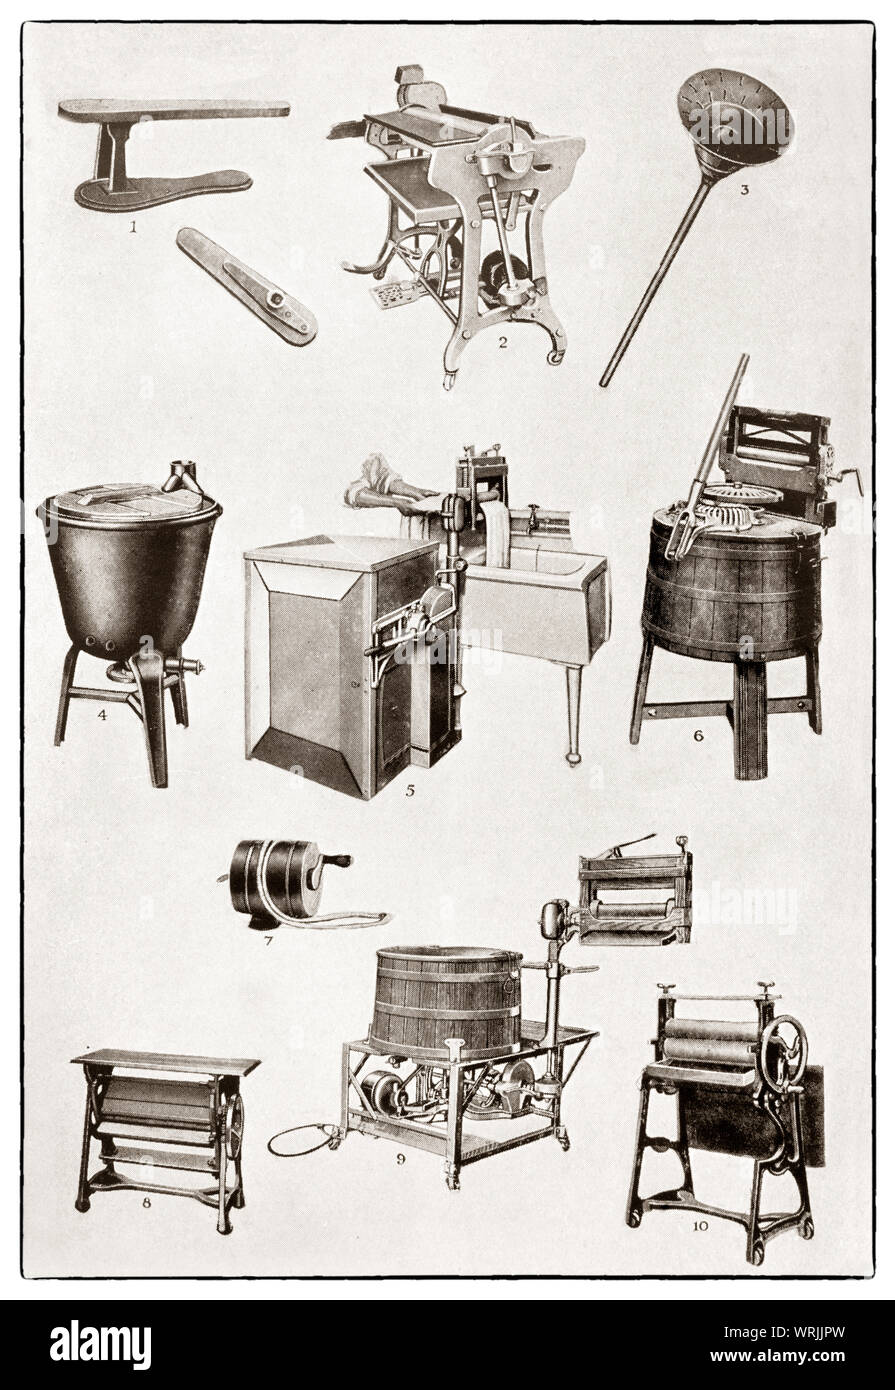 The latest kichenware displayed at the beginning of the 1930s in Mrs Beeton's 'All About Cookery' 1930 Edition. The featured mechanical laundering items include  1. ironing sleeve; 2. electric ironing machine; 3. vacuum clothes washer; 4. gas heated copper; 5. electric washing machine; 6. hand operated washing machine; 7. clothes line protector; 8&10. table mangle; 9. Electric washer and wringer Stock Photo